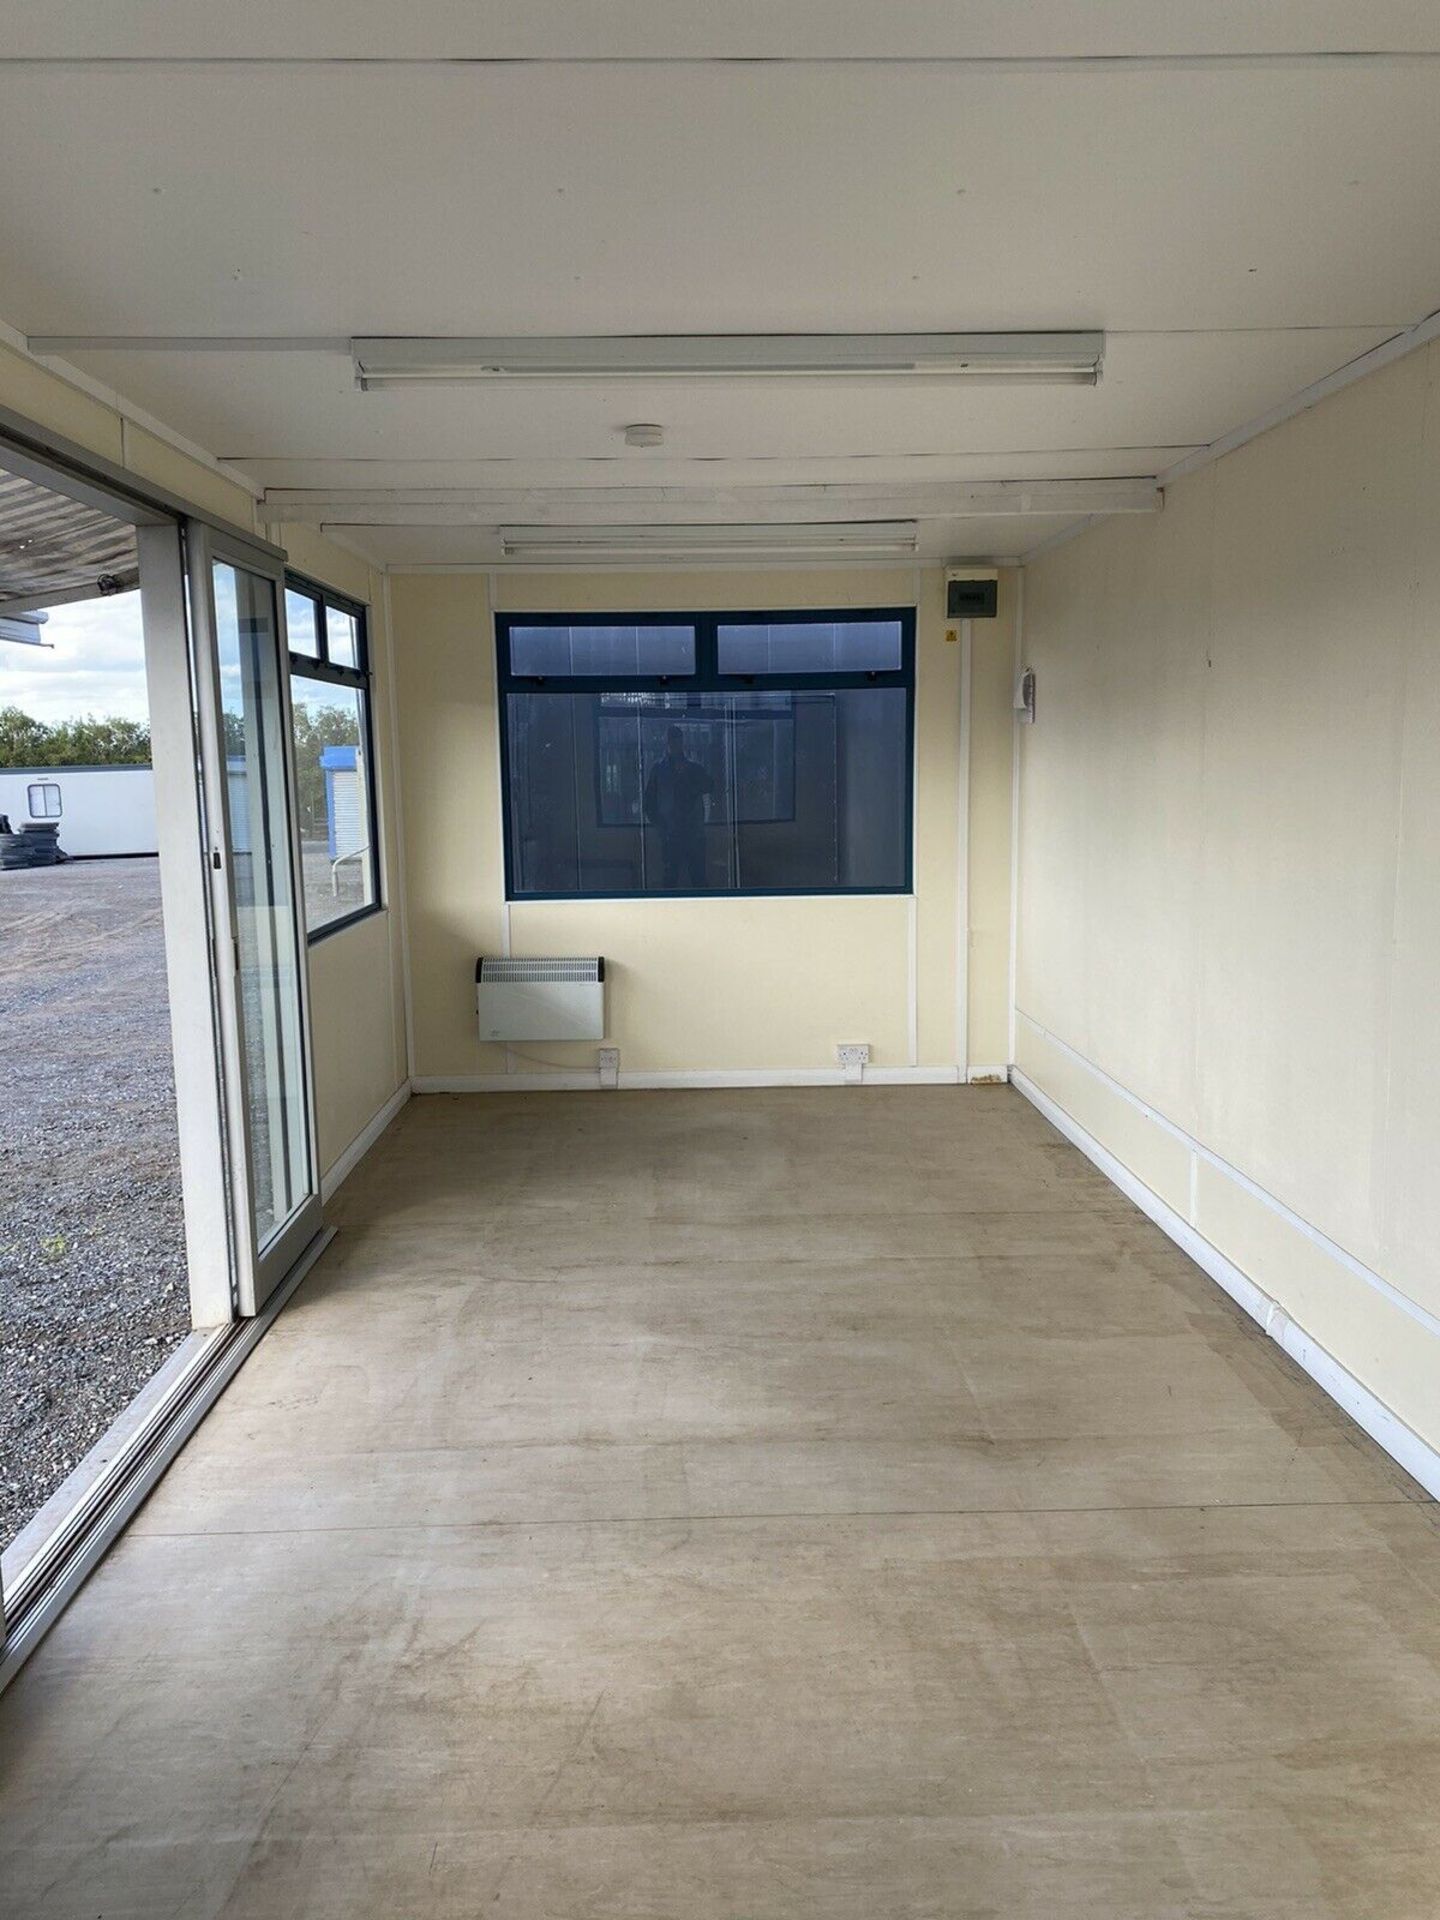 24ft Marketing Suite, Sales Centre Office - Image 11 of 12